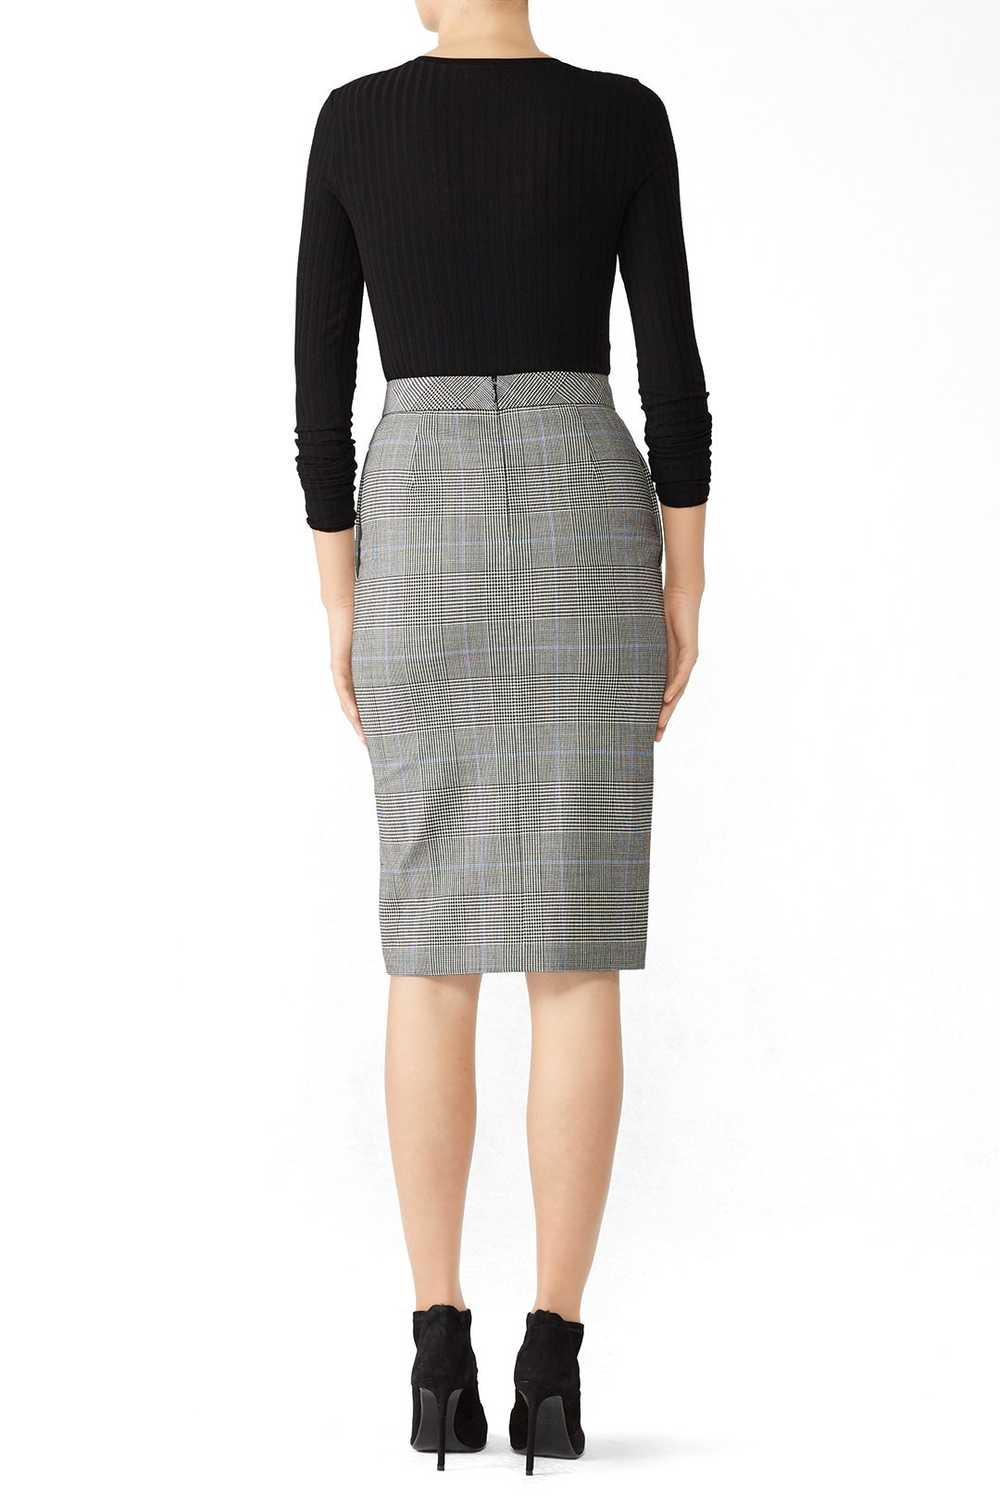 Theory Zip Front Pencil Skirt - image 2